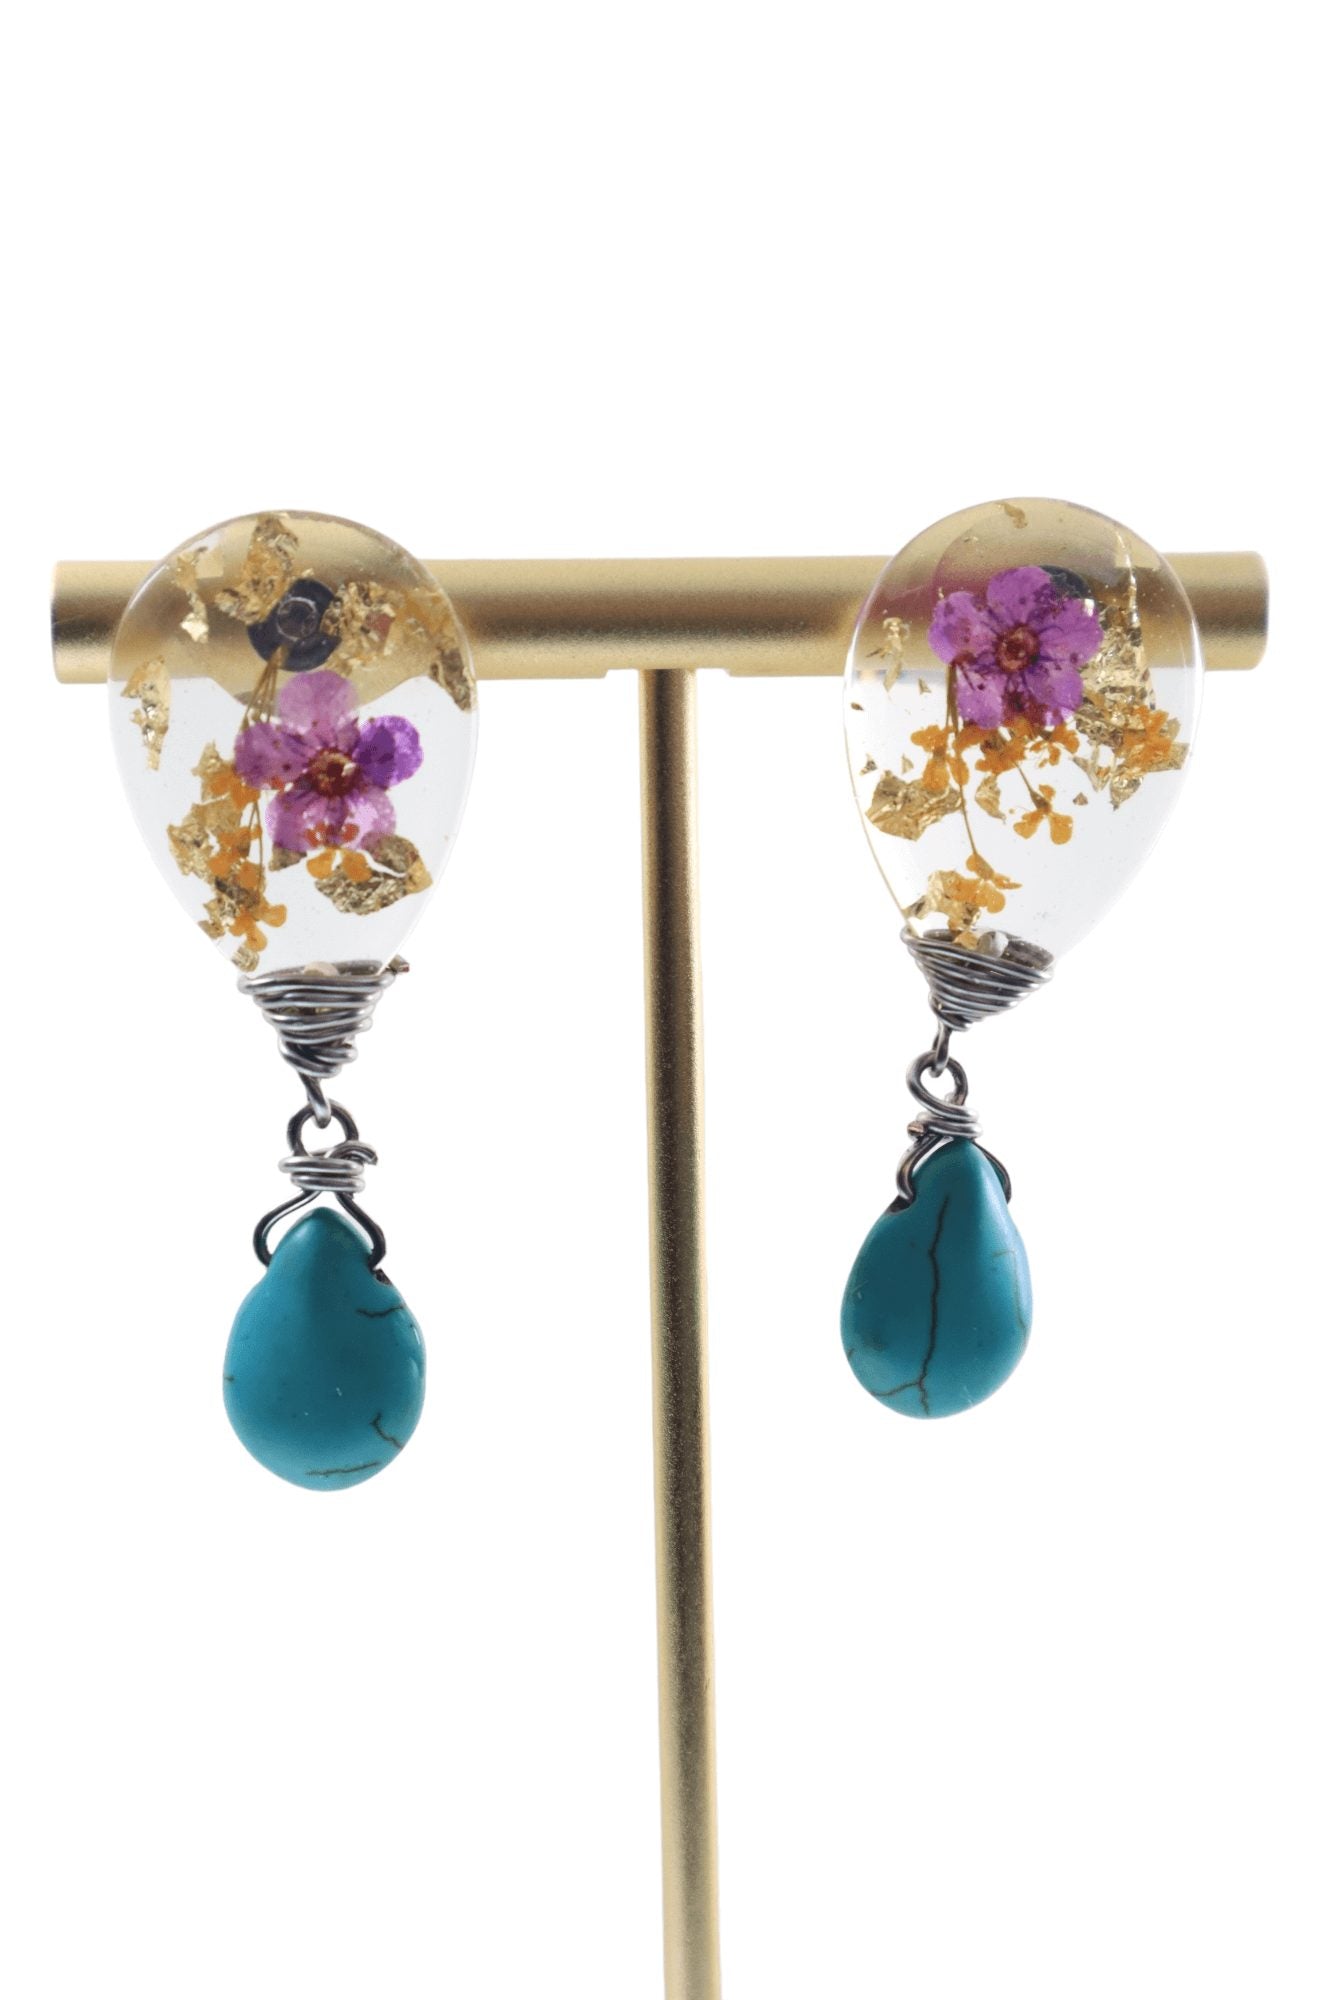 Pressed-flower-turquoise-drop-stud-earrings---turquoise-earrings-studs---Kaleidoscopes-And-Polka-Dots